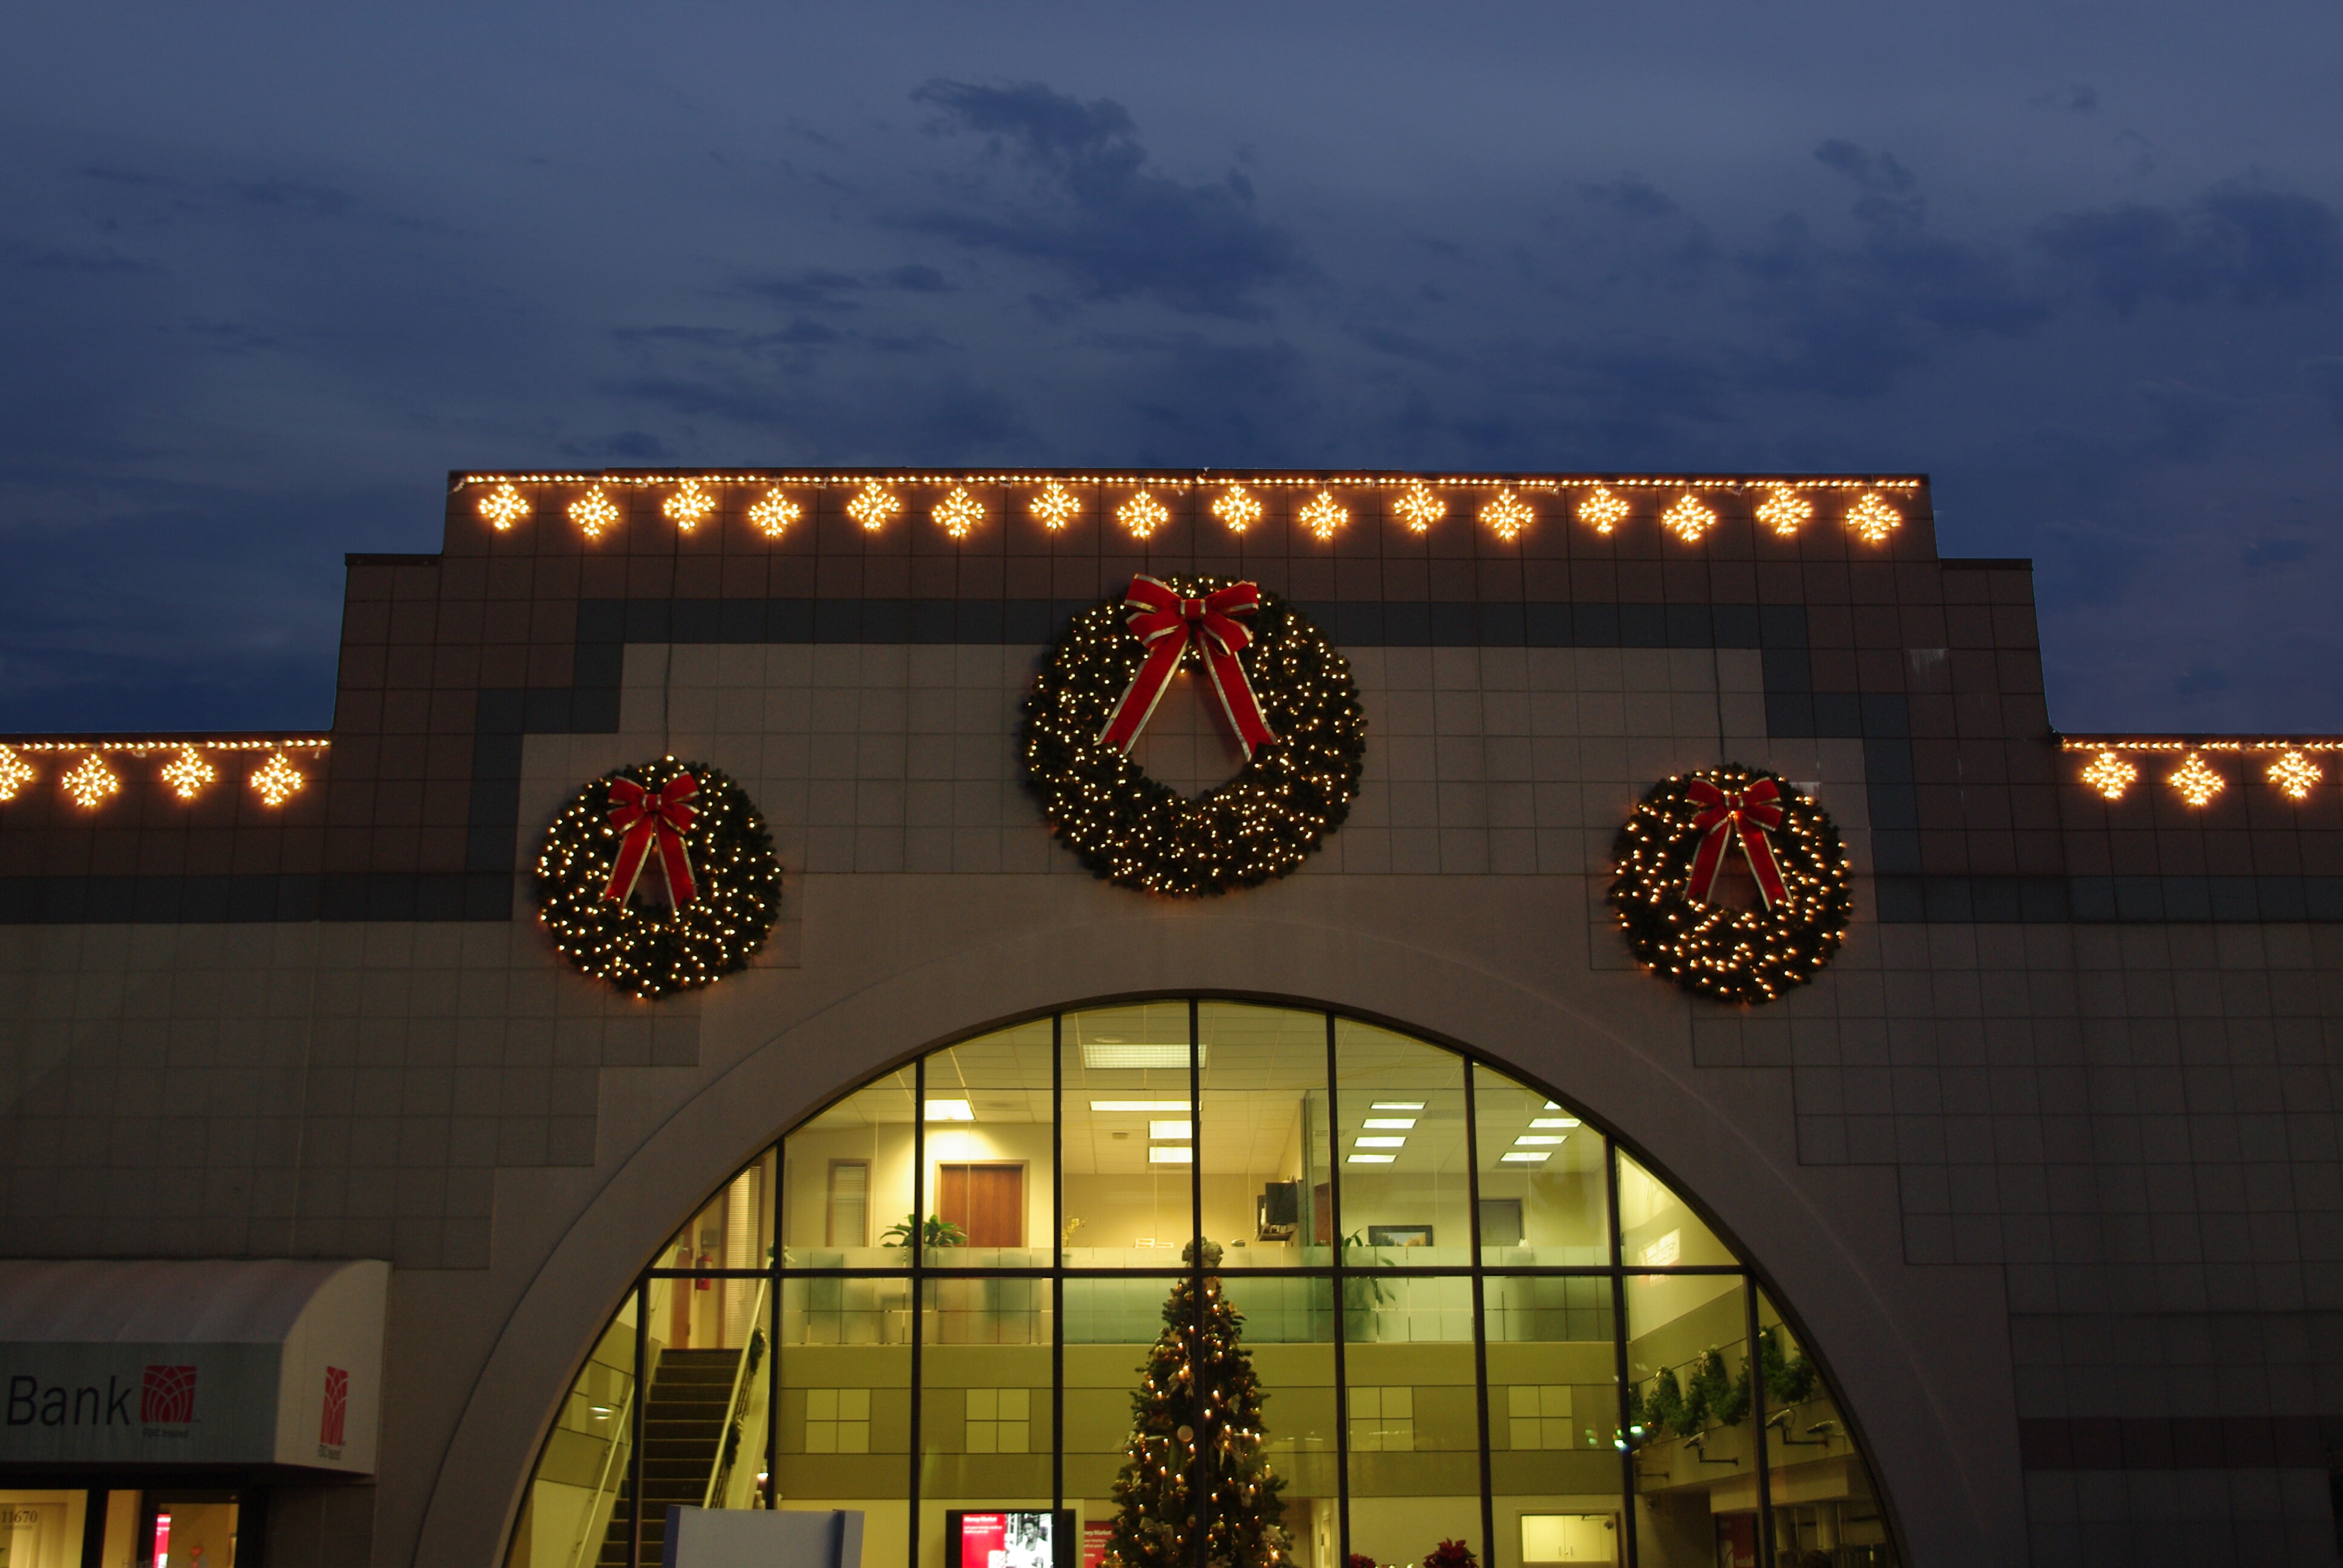 commercial property with holiday wreath and light display